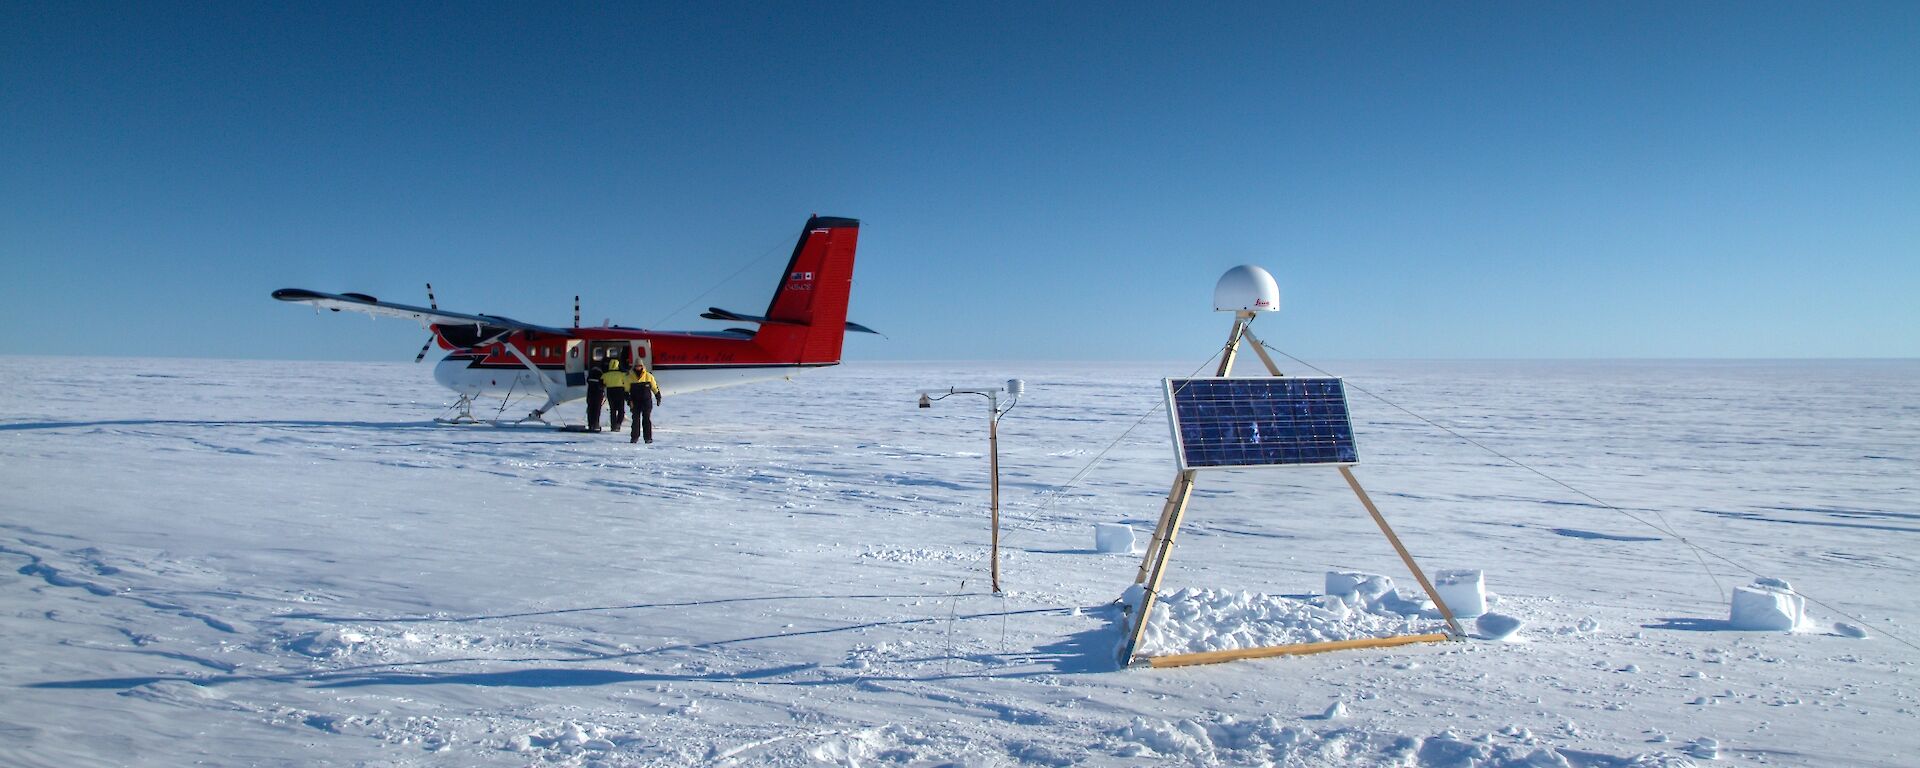 A Global Positioning System and meteorological site deployed to the south west of Law Dome.